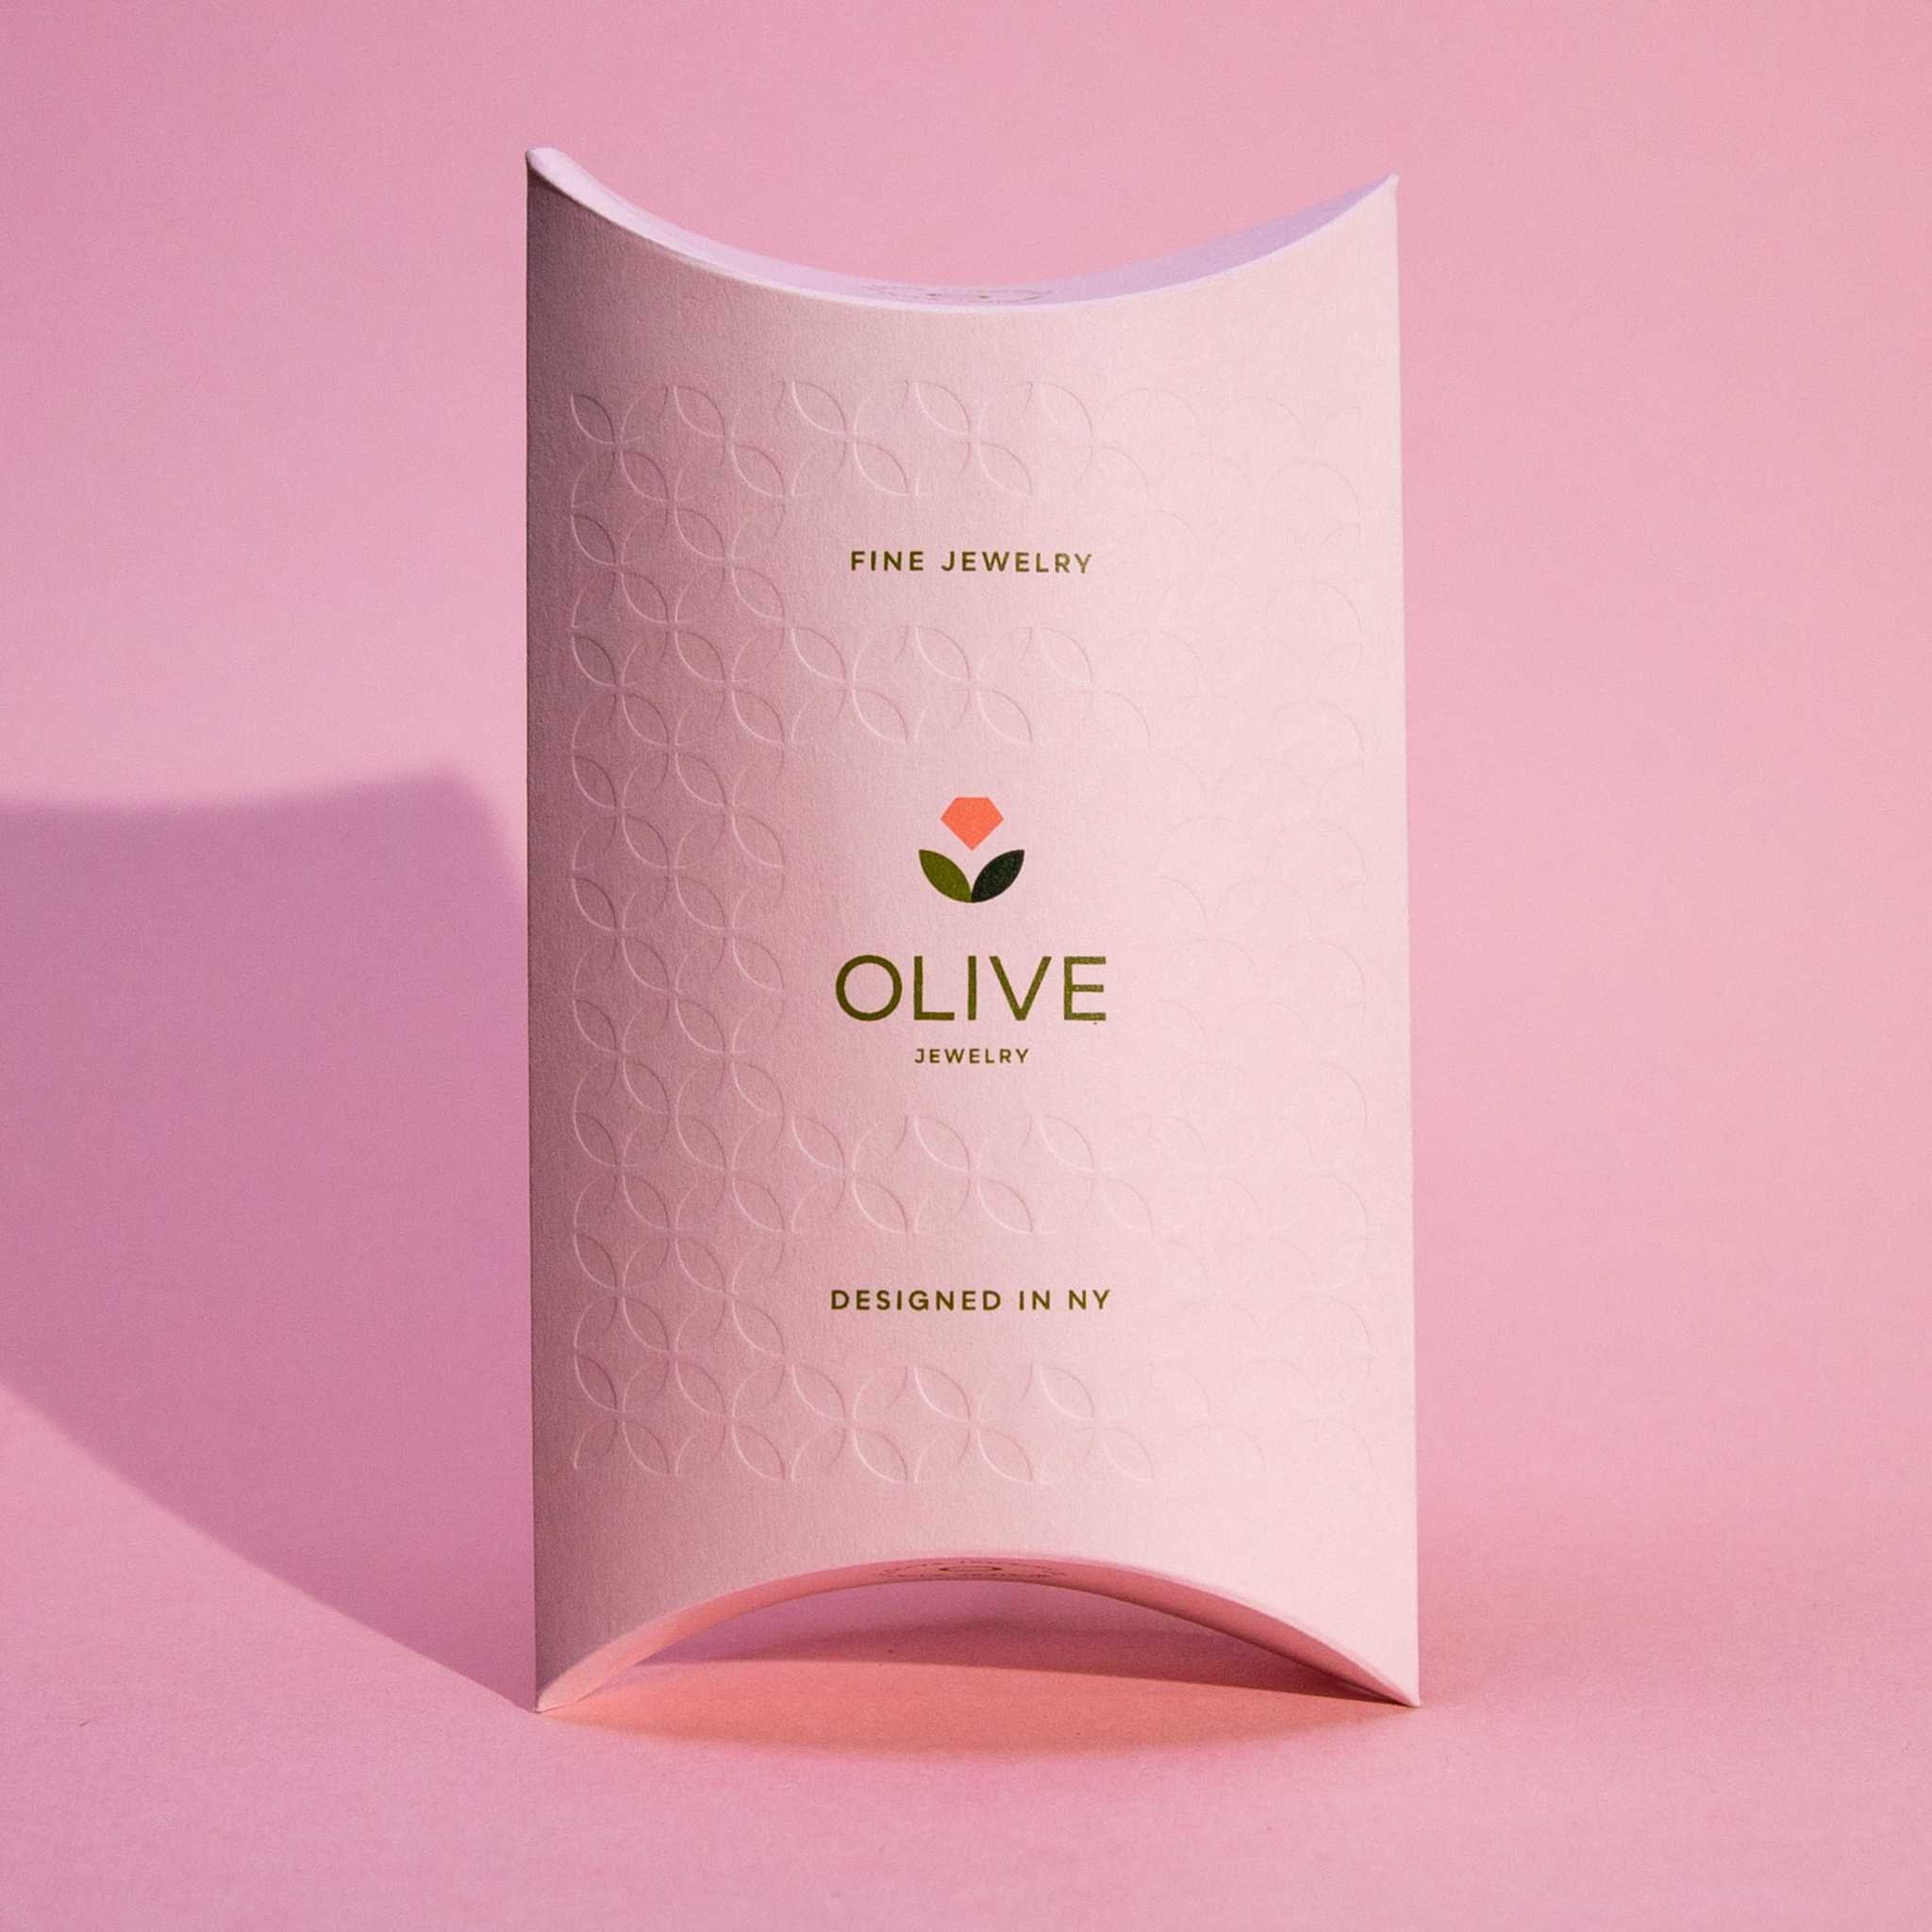   Olive Jewelry  by  Co-motion Studio  